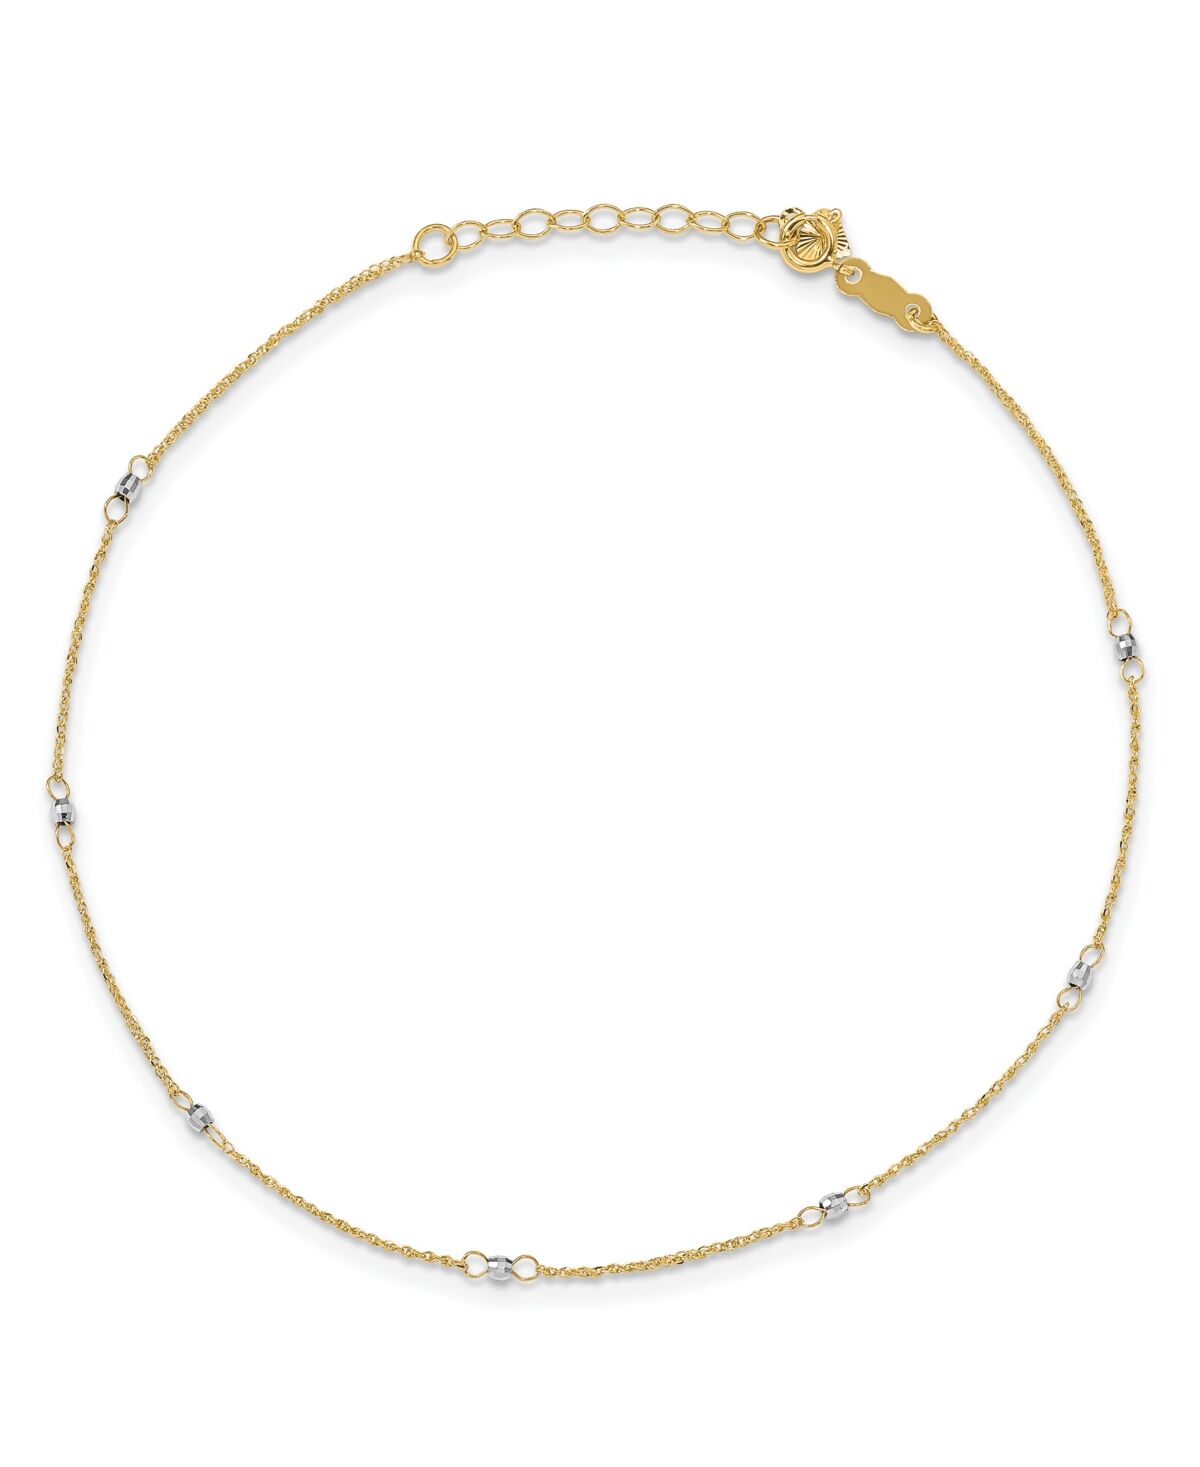 Macy's Ropa Anklet in 14k Yellow and White Gold - Tt Gold